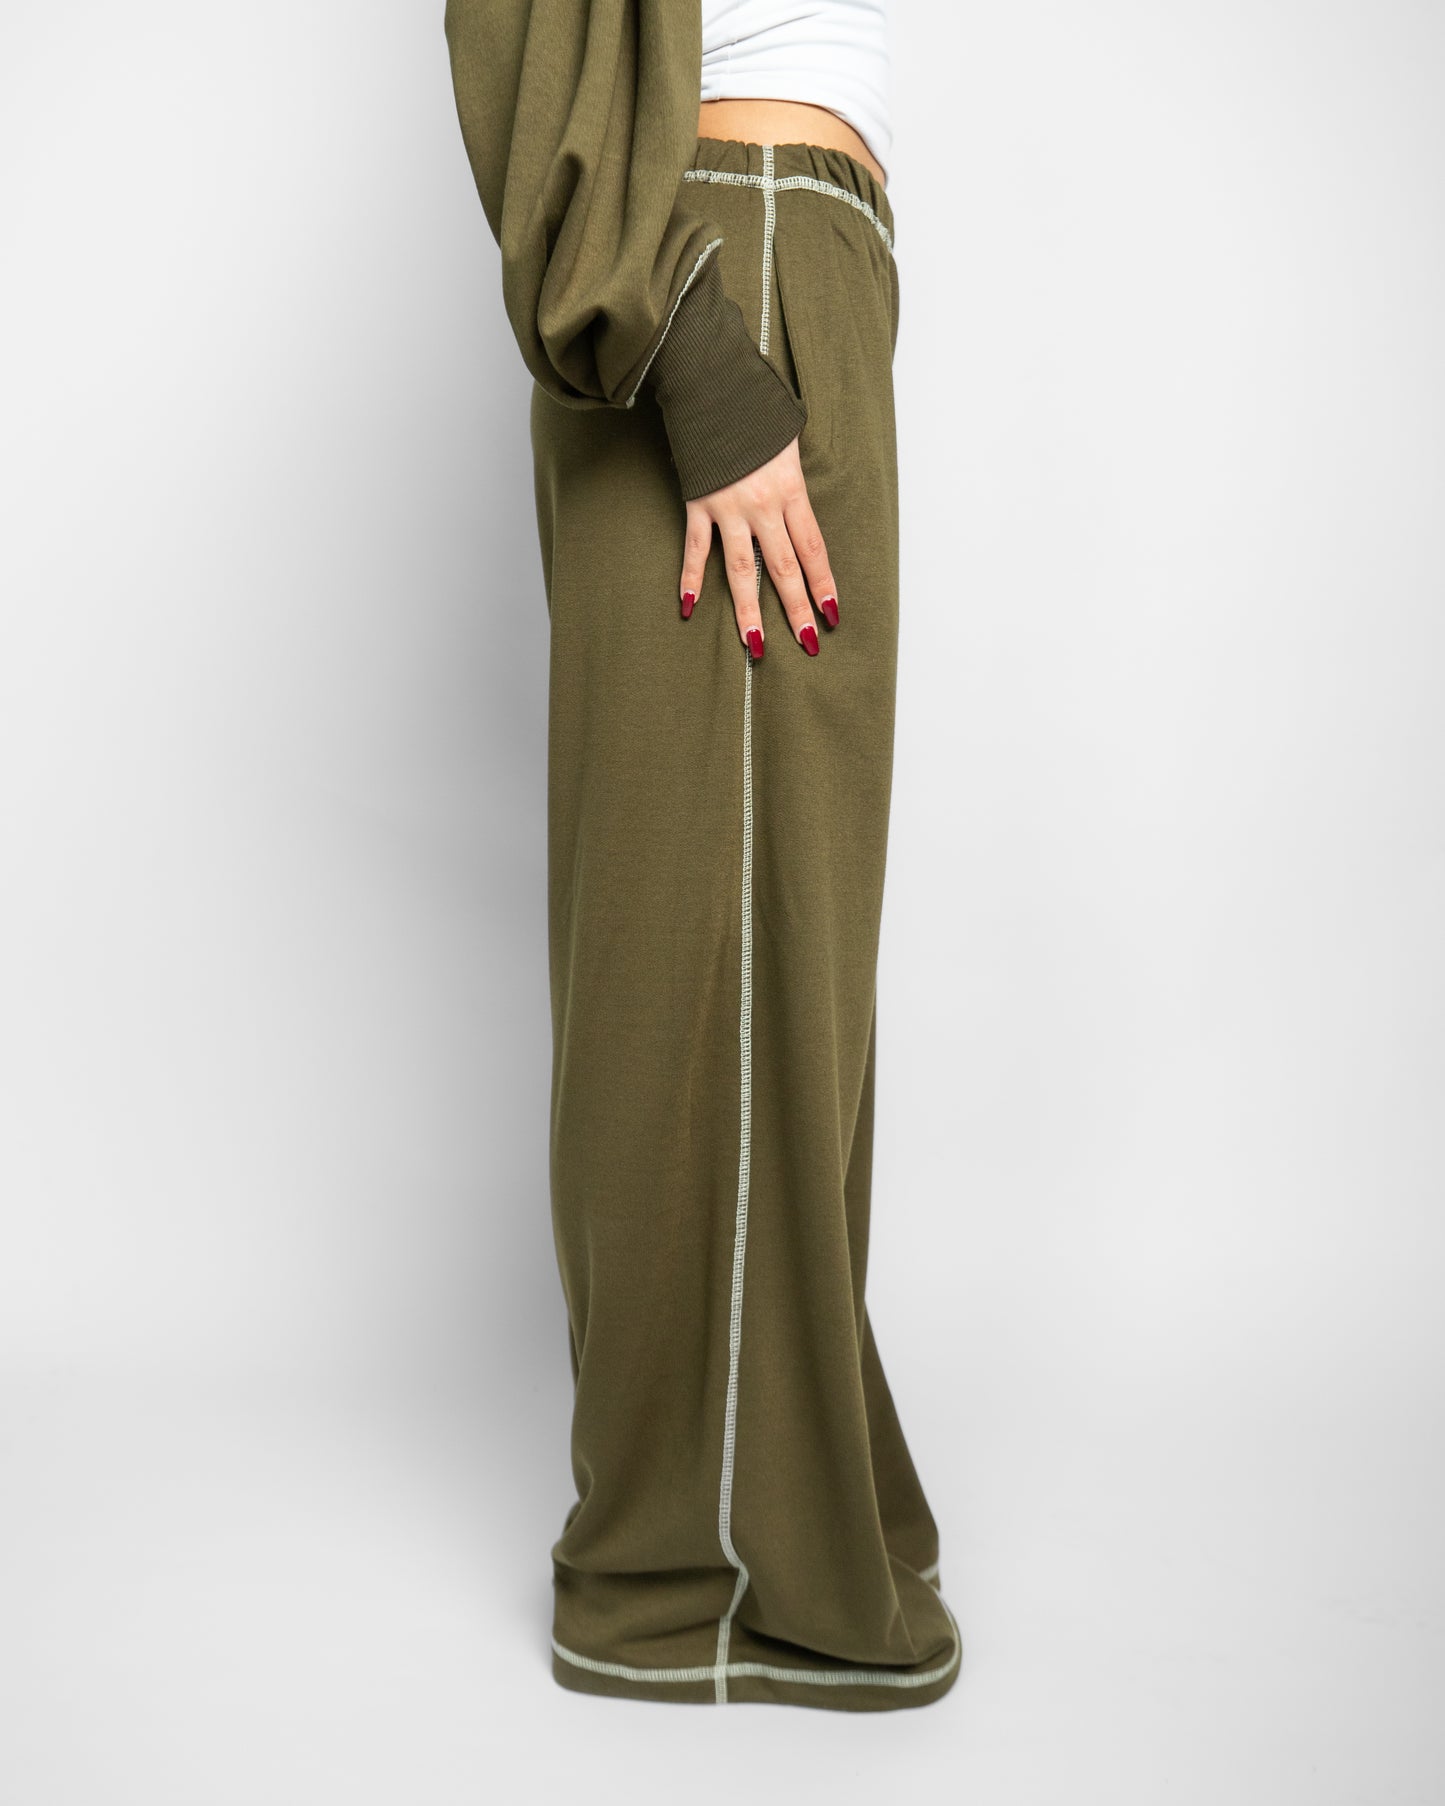 Go with the Flow Stitched Pants - OLIVE